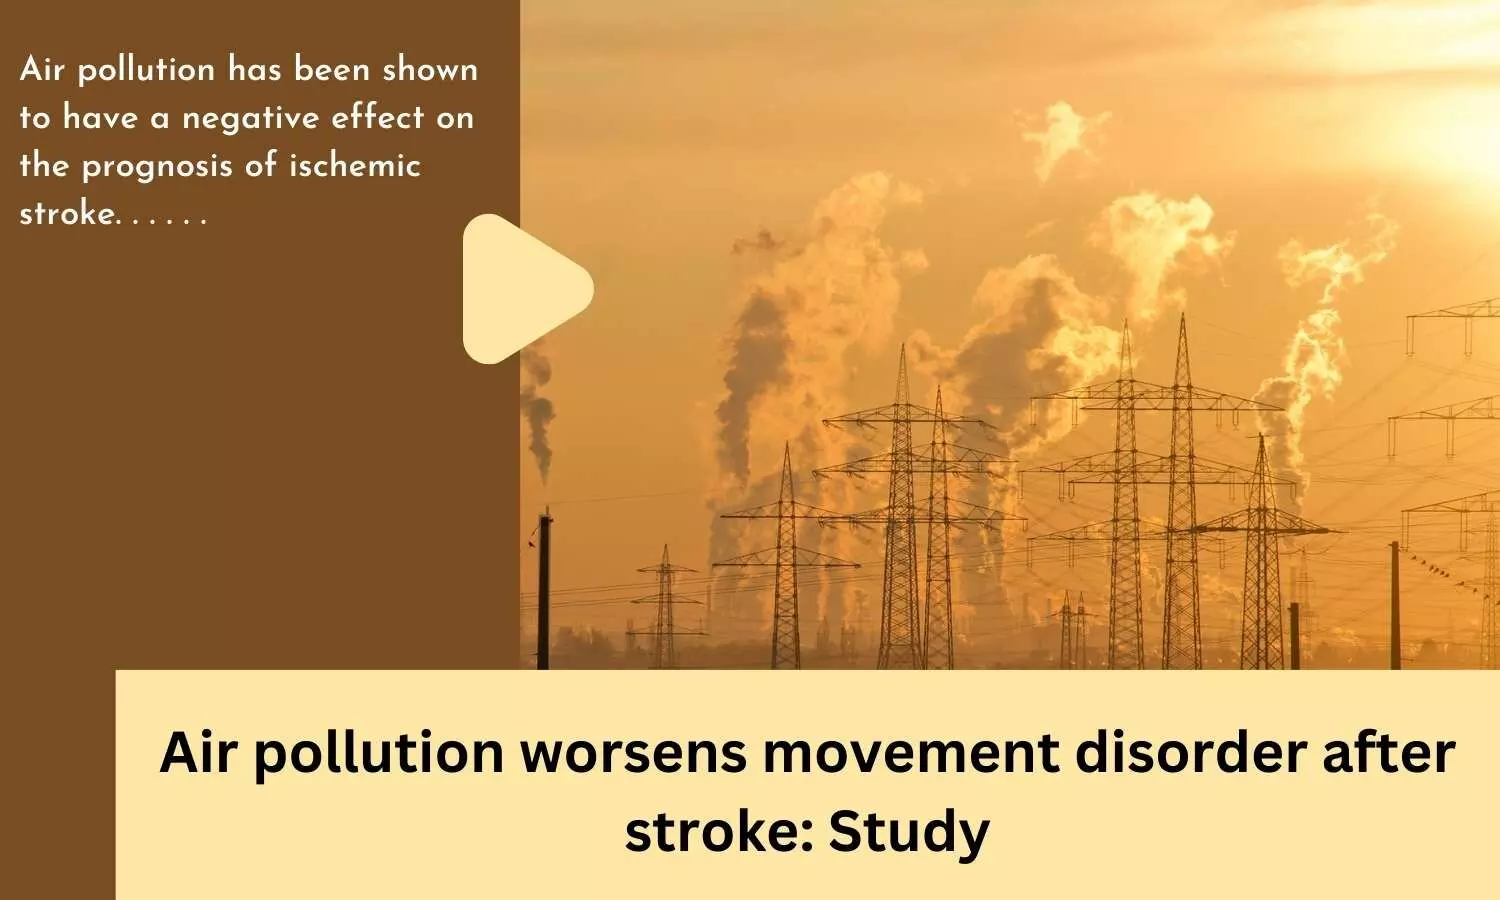 Air pollution worsens movement disorder after stroke: Study